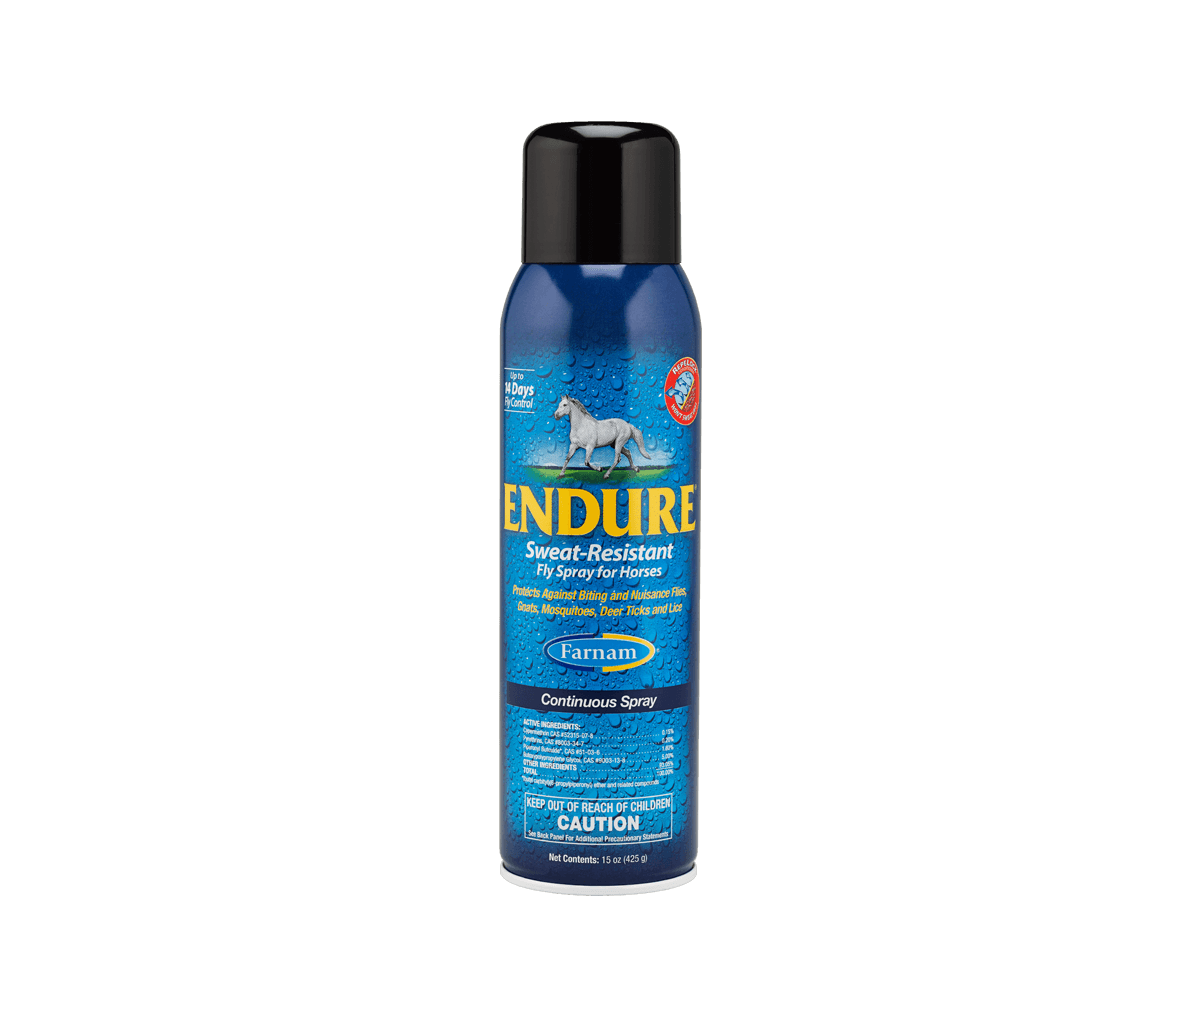 Endure Sweat Resistant Fly Spray now available in a continuous spray format